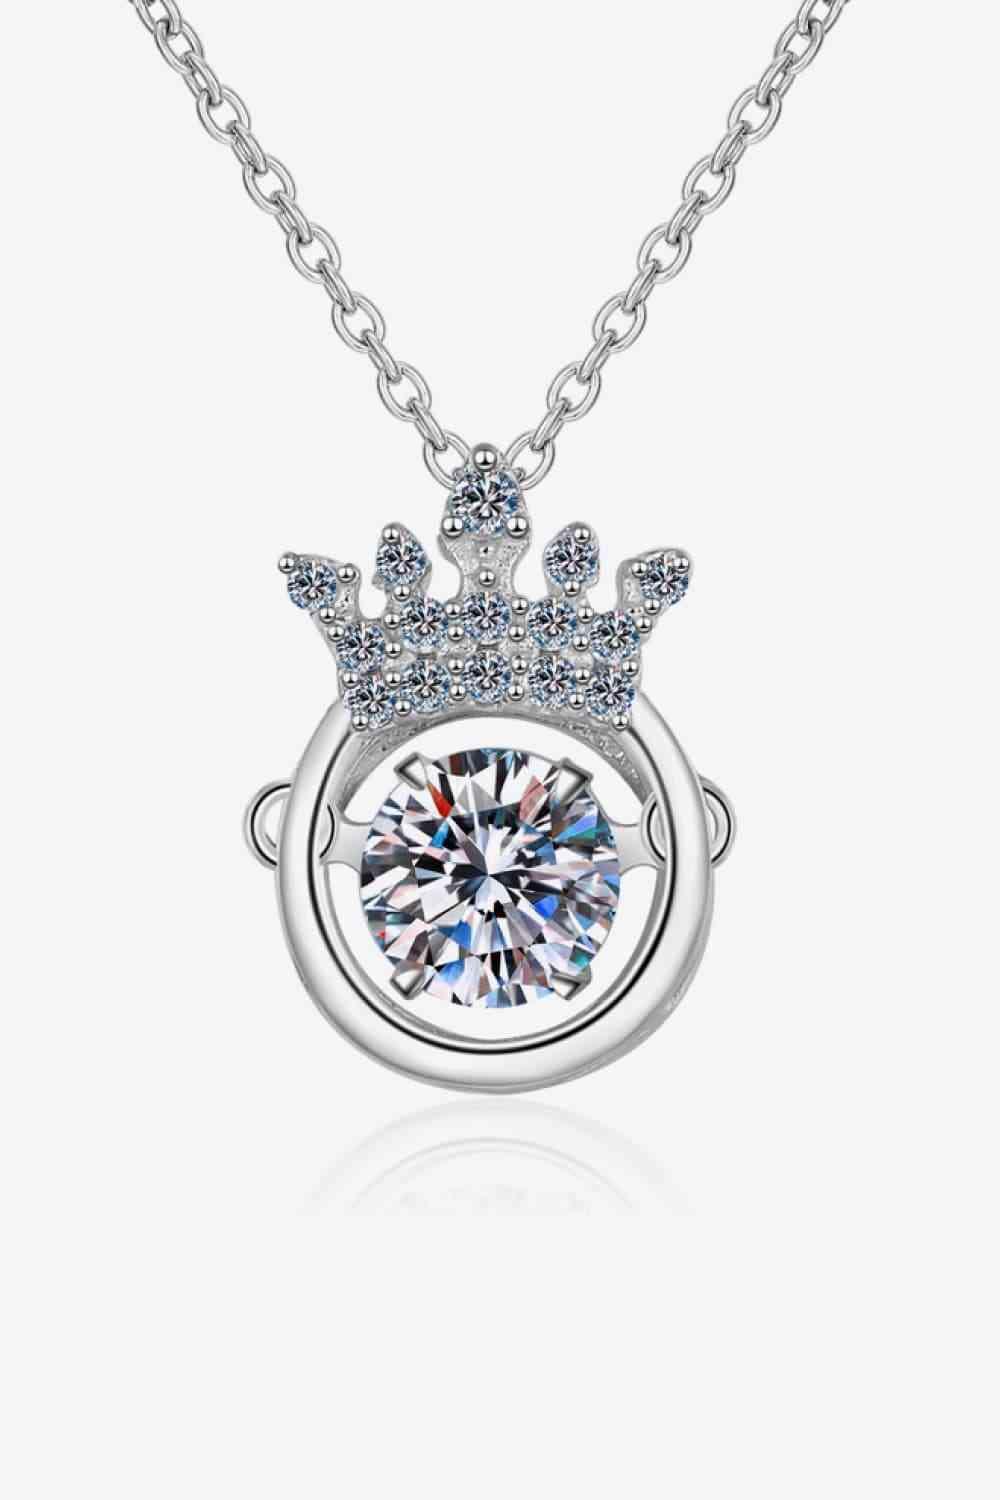 a necklace with a crown on top of it